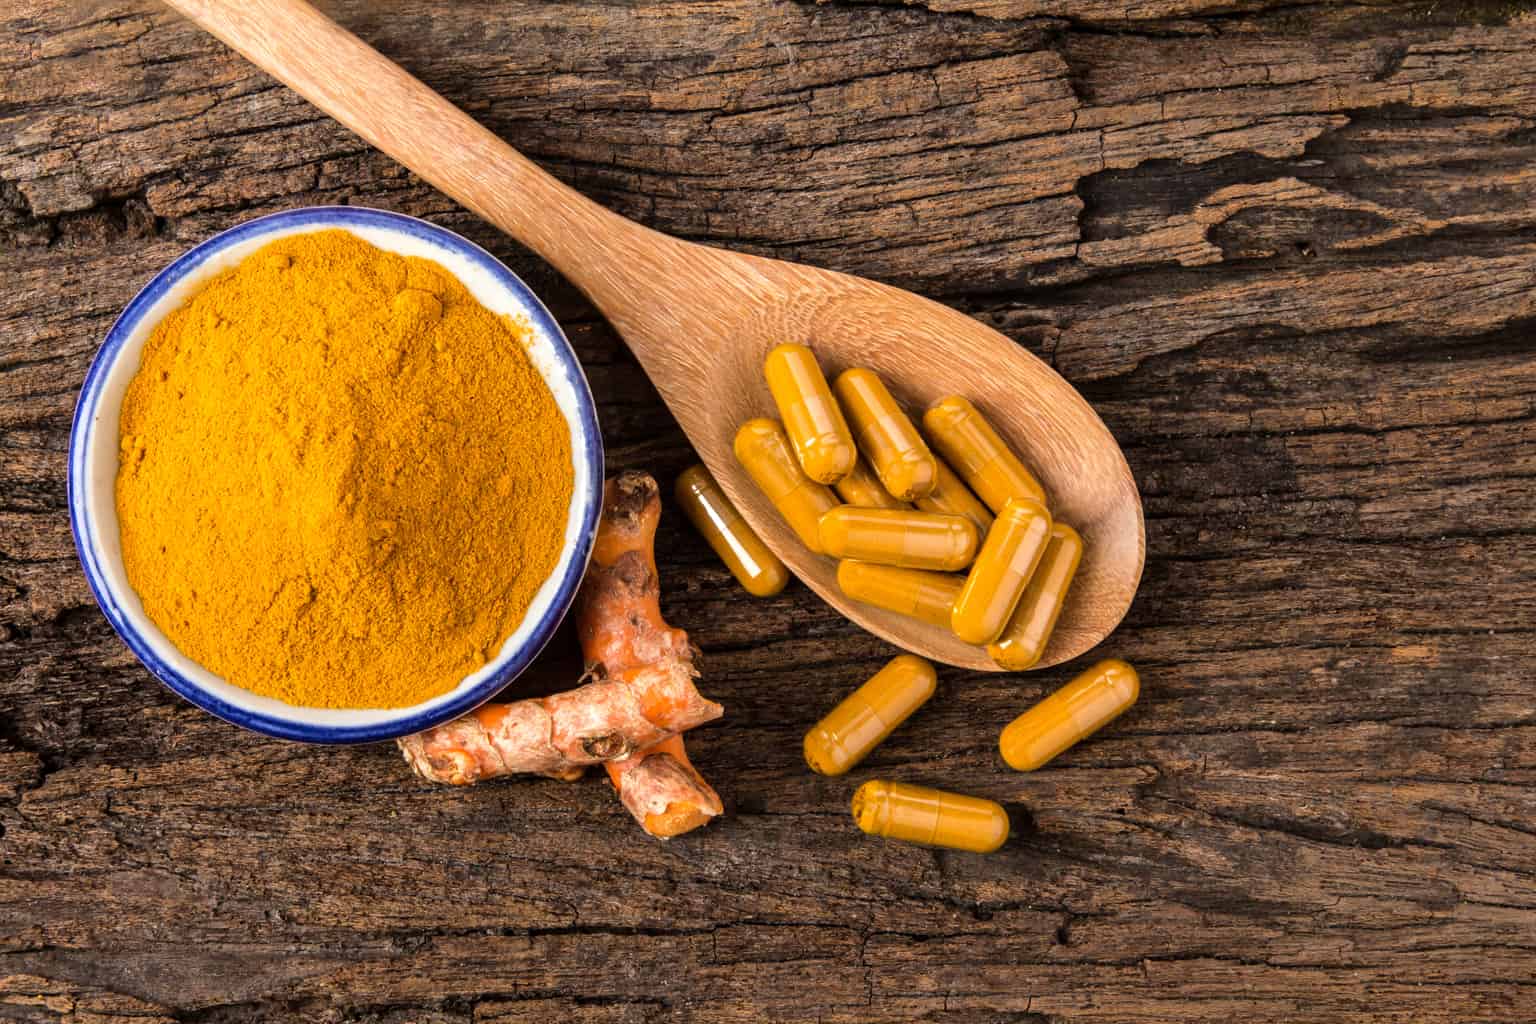 This is why everyone's so obsessed with Curcumin right now